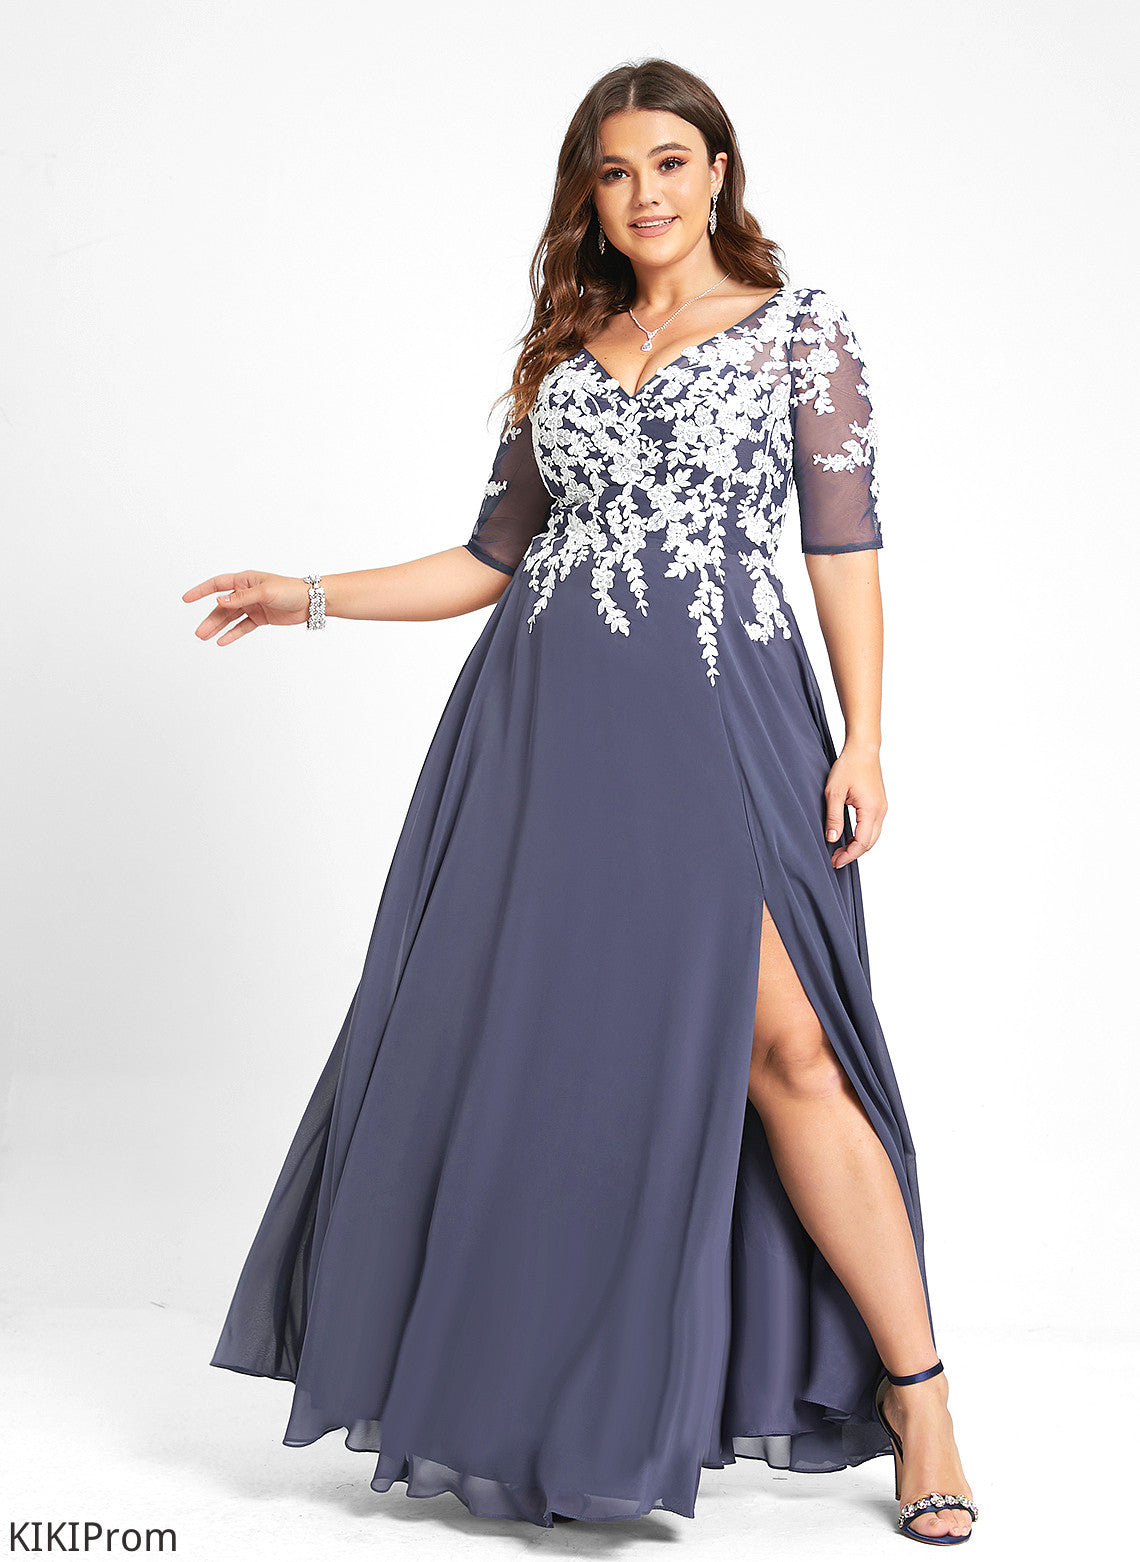 Chiffon Prom Dresses Lexie Sequins A-Line With Floor-Length V-neck Lace